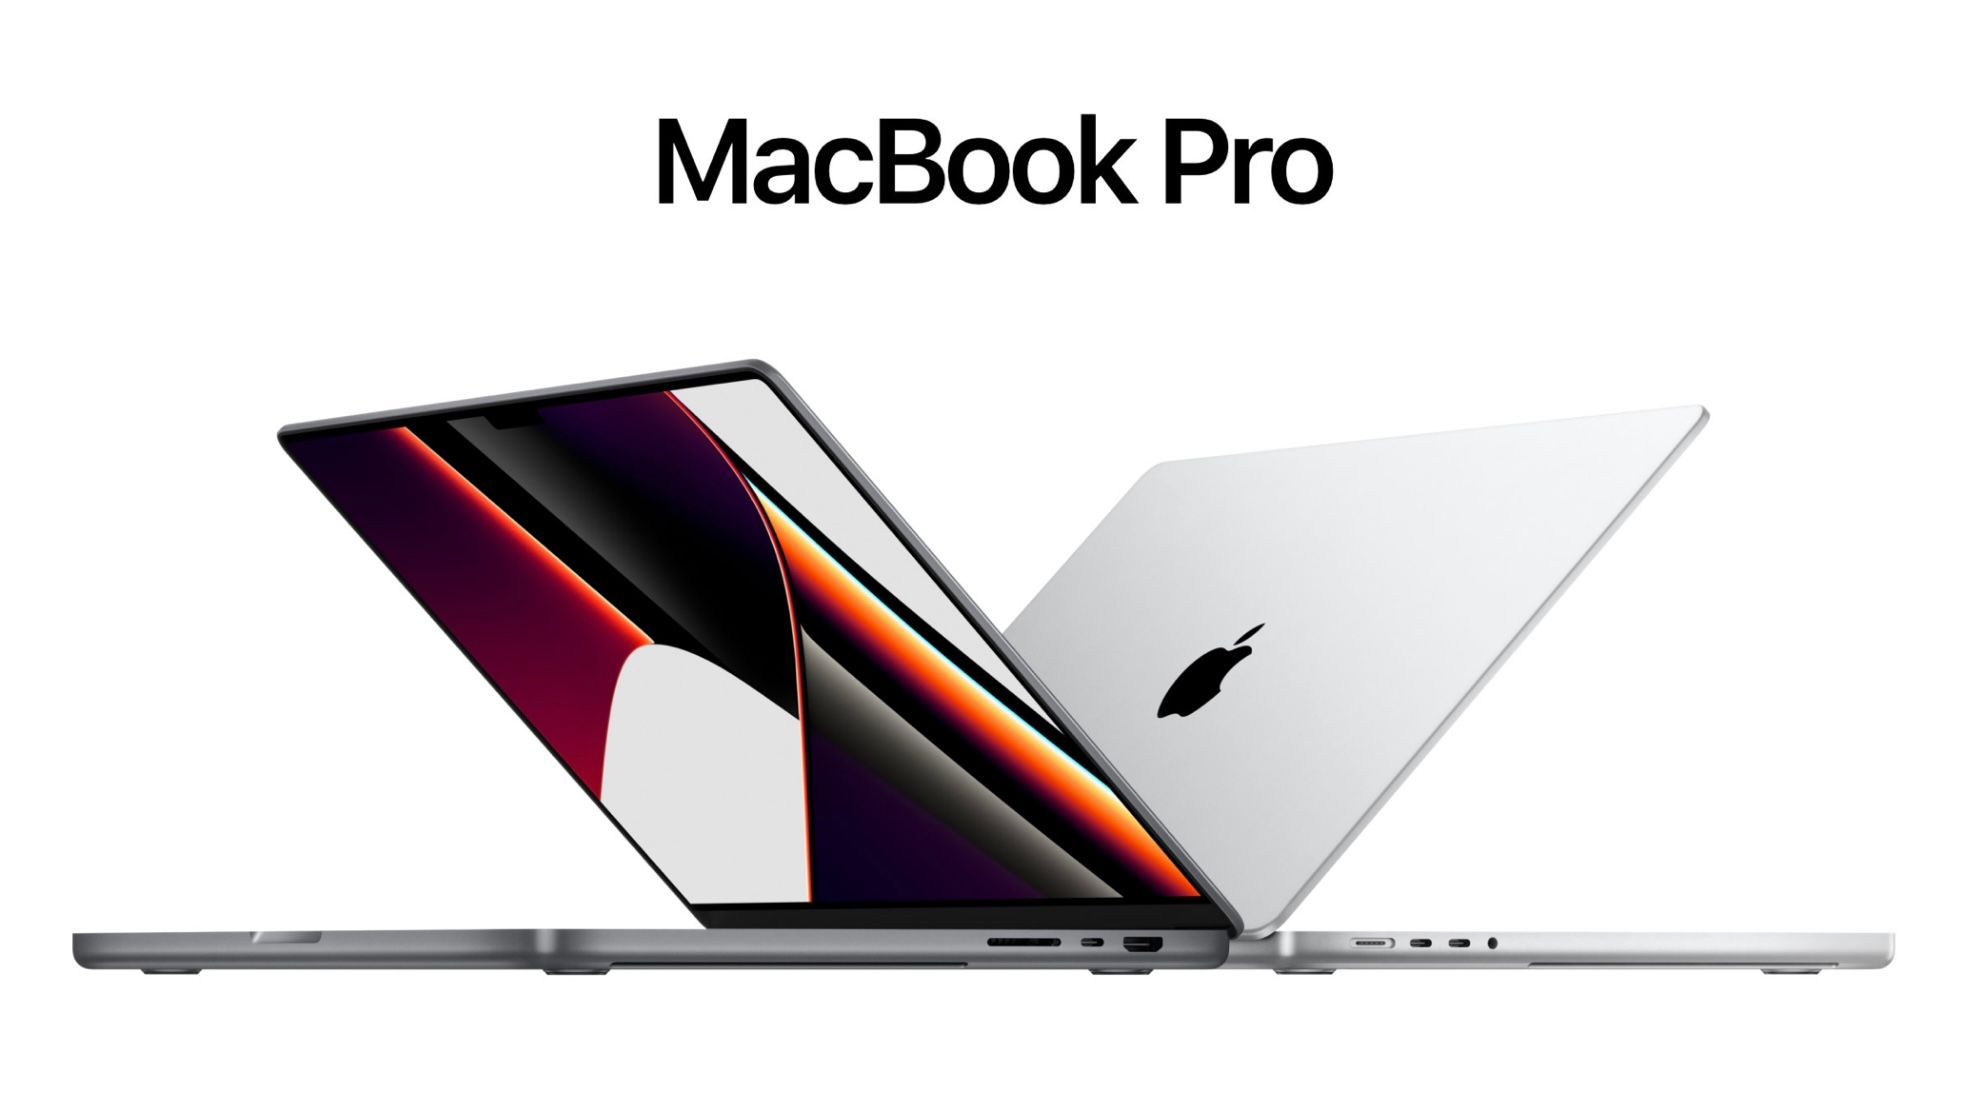 New MacBook Pro duo to start production in Q4